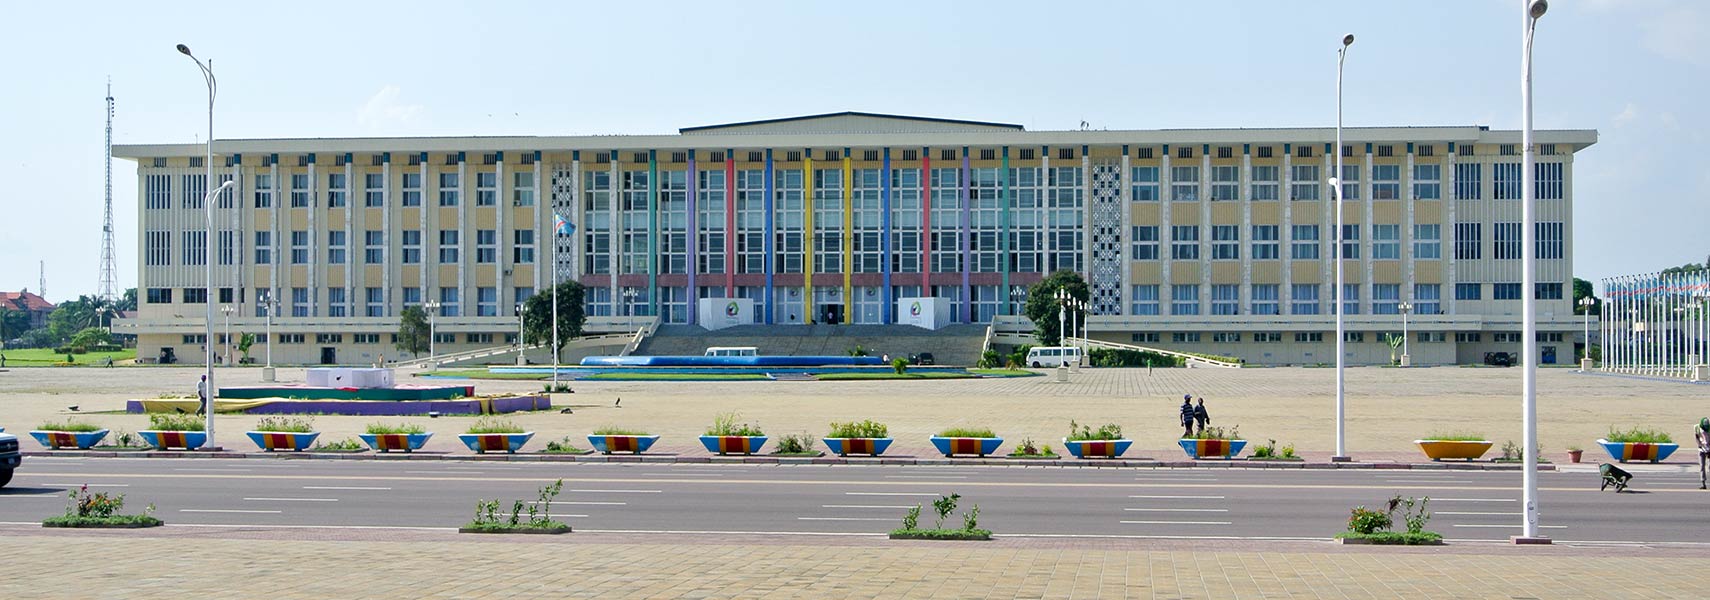 The National Assembly of the Democratic Republic of the Congo in Kinshasa